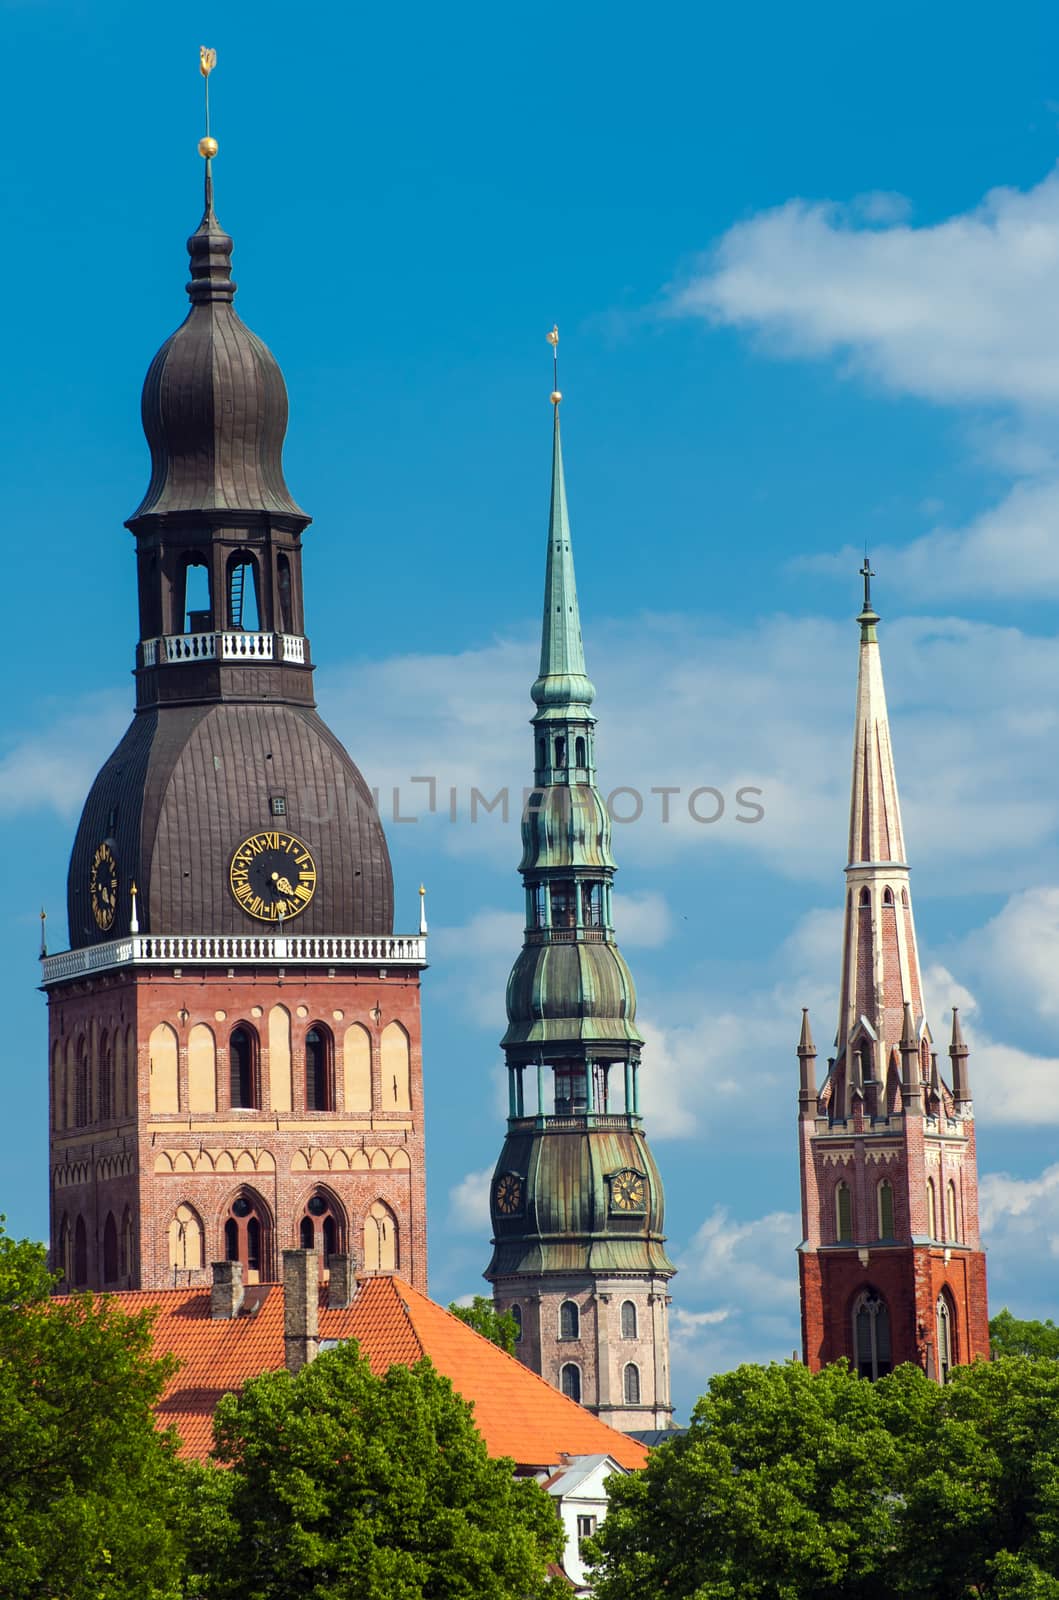  Three church towers in the picture are the Riga Dome cathedral,  St. Saviour's Church and St. Peter's church.